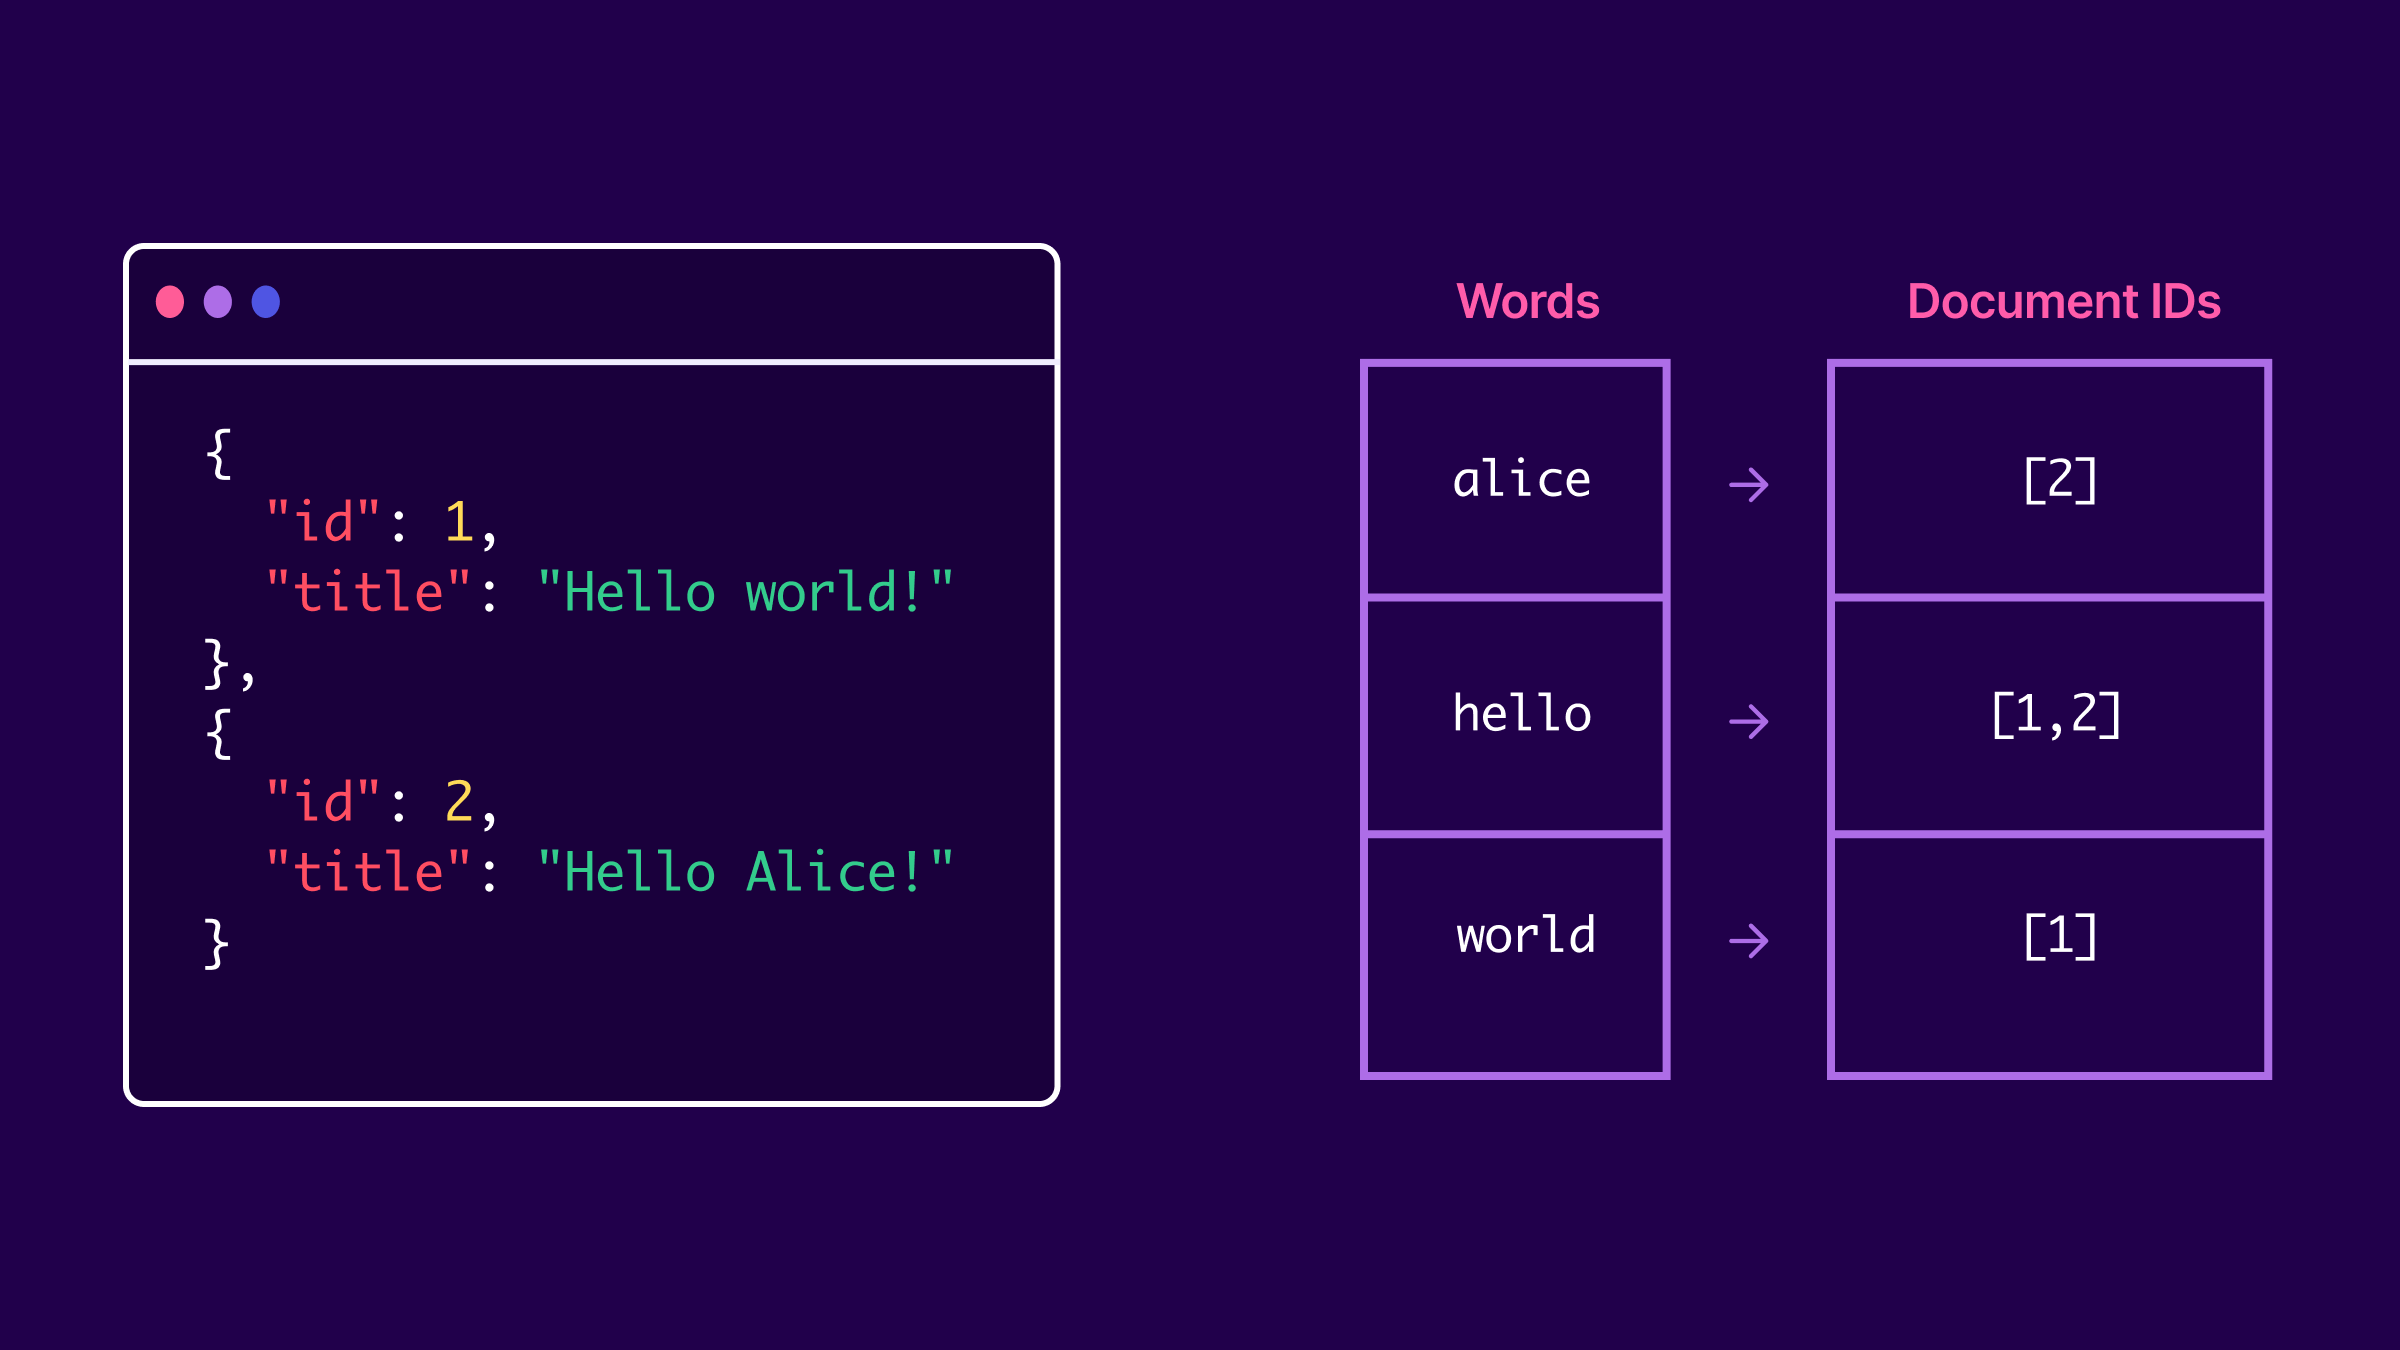 Given the following documents: {   “id”: 1   "title": "Hello world!" }, {     “id”: 2     "title": "Hello Alice!" }.  The inverted index would look like this:  "alice" -> [2], "hello" -> [1,2],  "world" -> [1] 